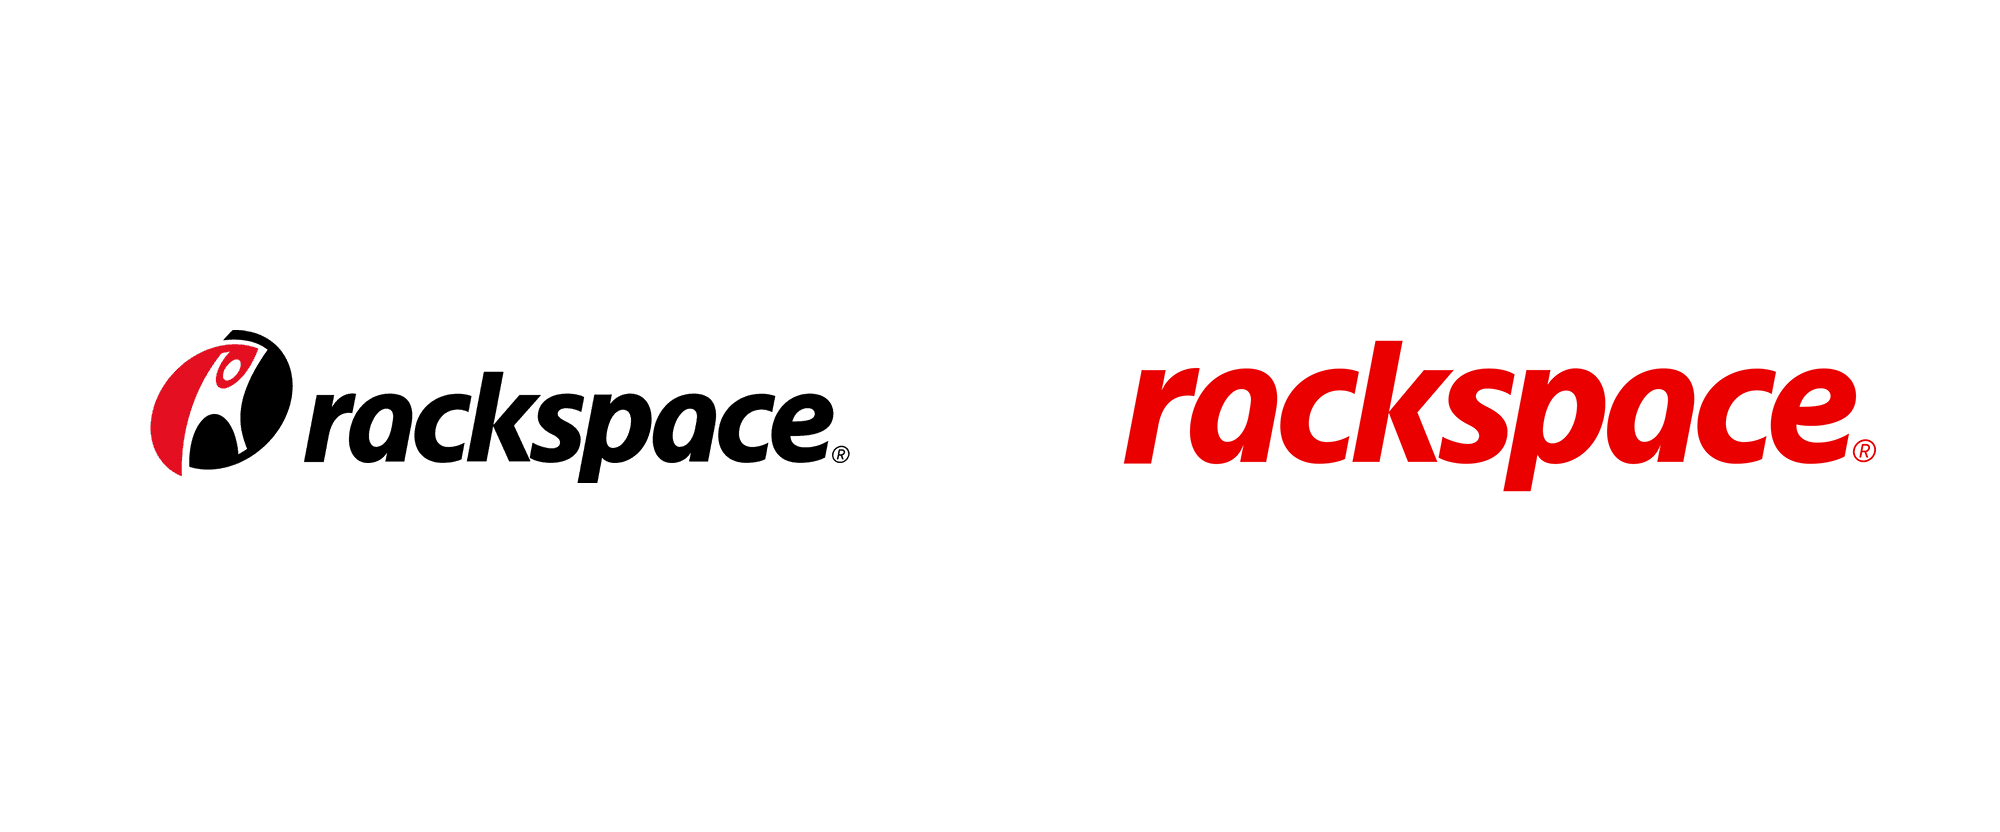 New Logo and Identity for Rackspace by Havas